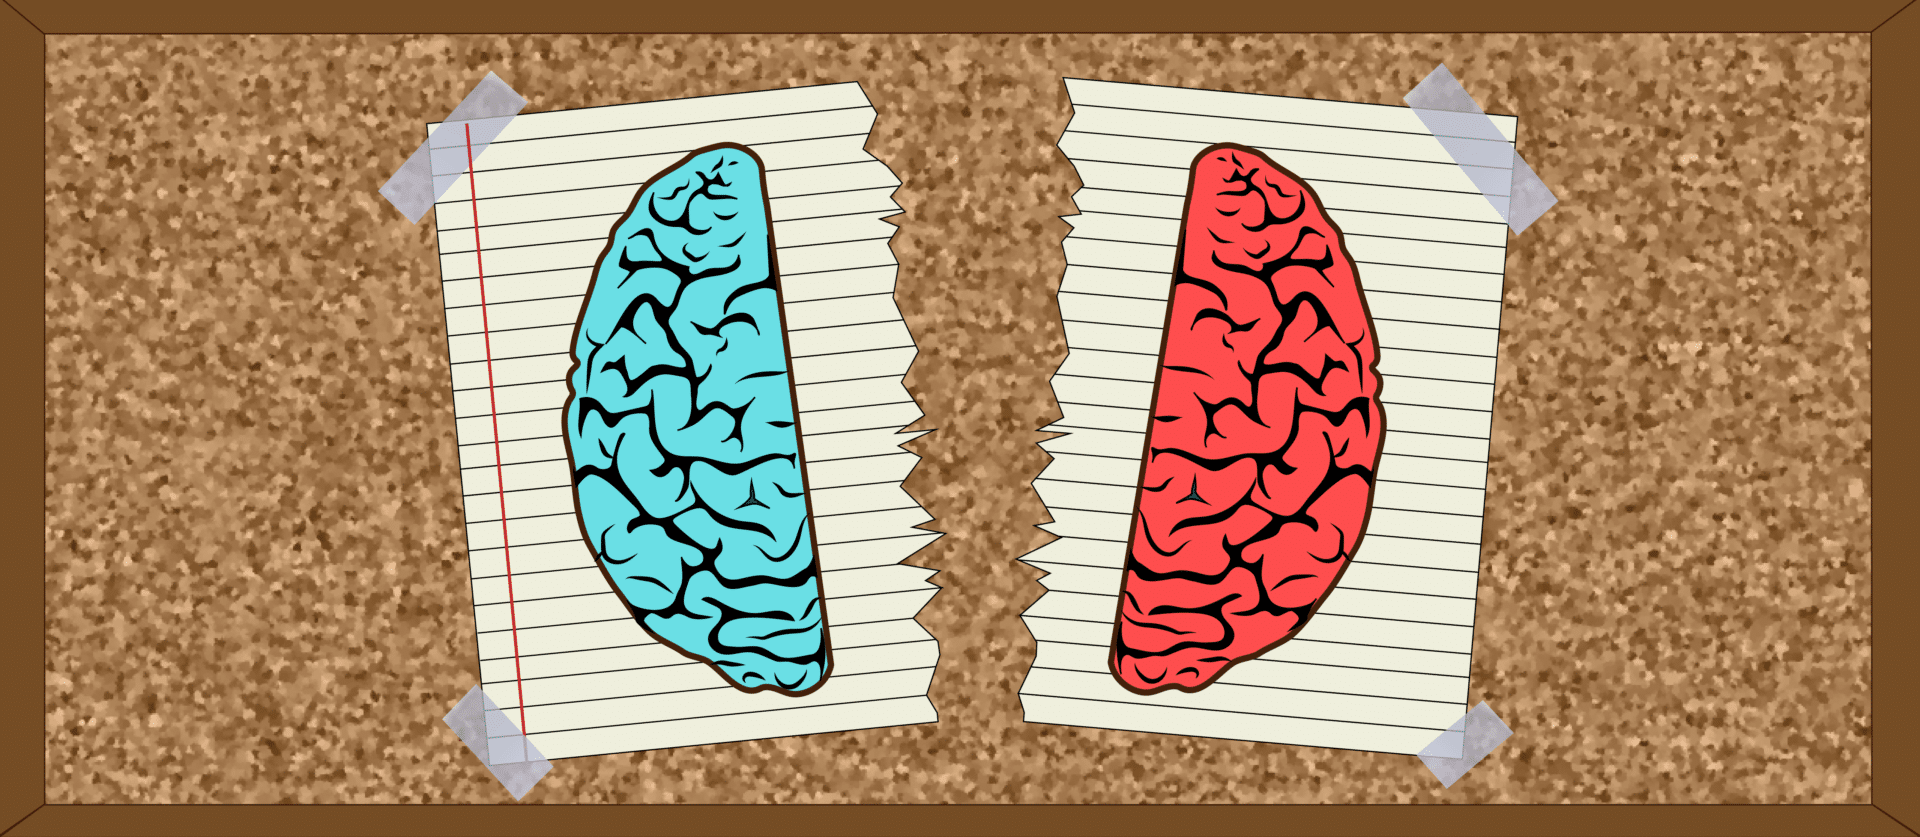 A Picture of the Left Brain and Right Brain Split Symbolizing The Viewpoint Diversity Movement's History